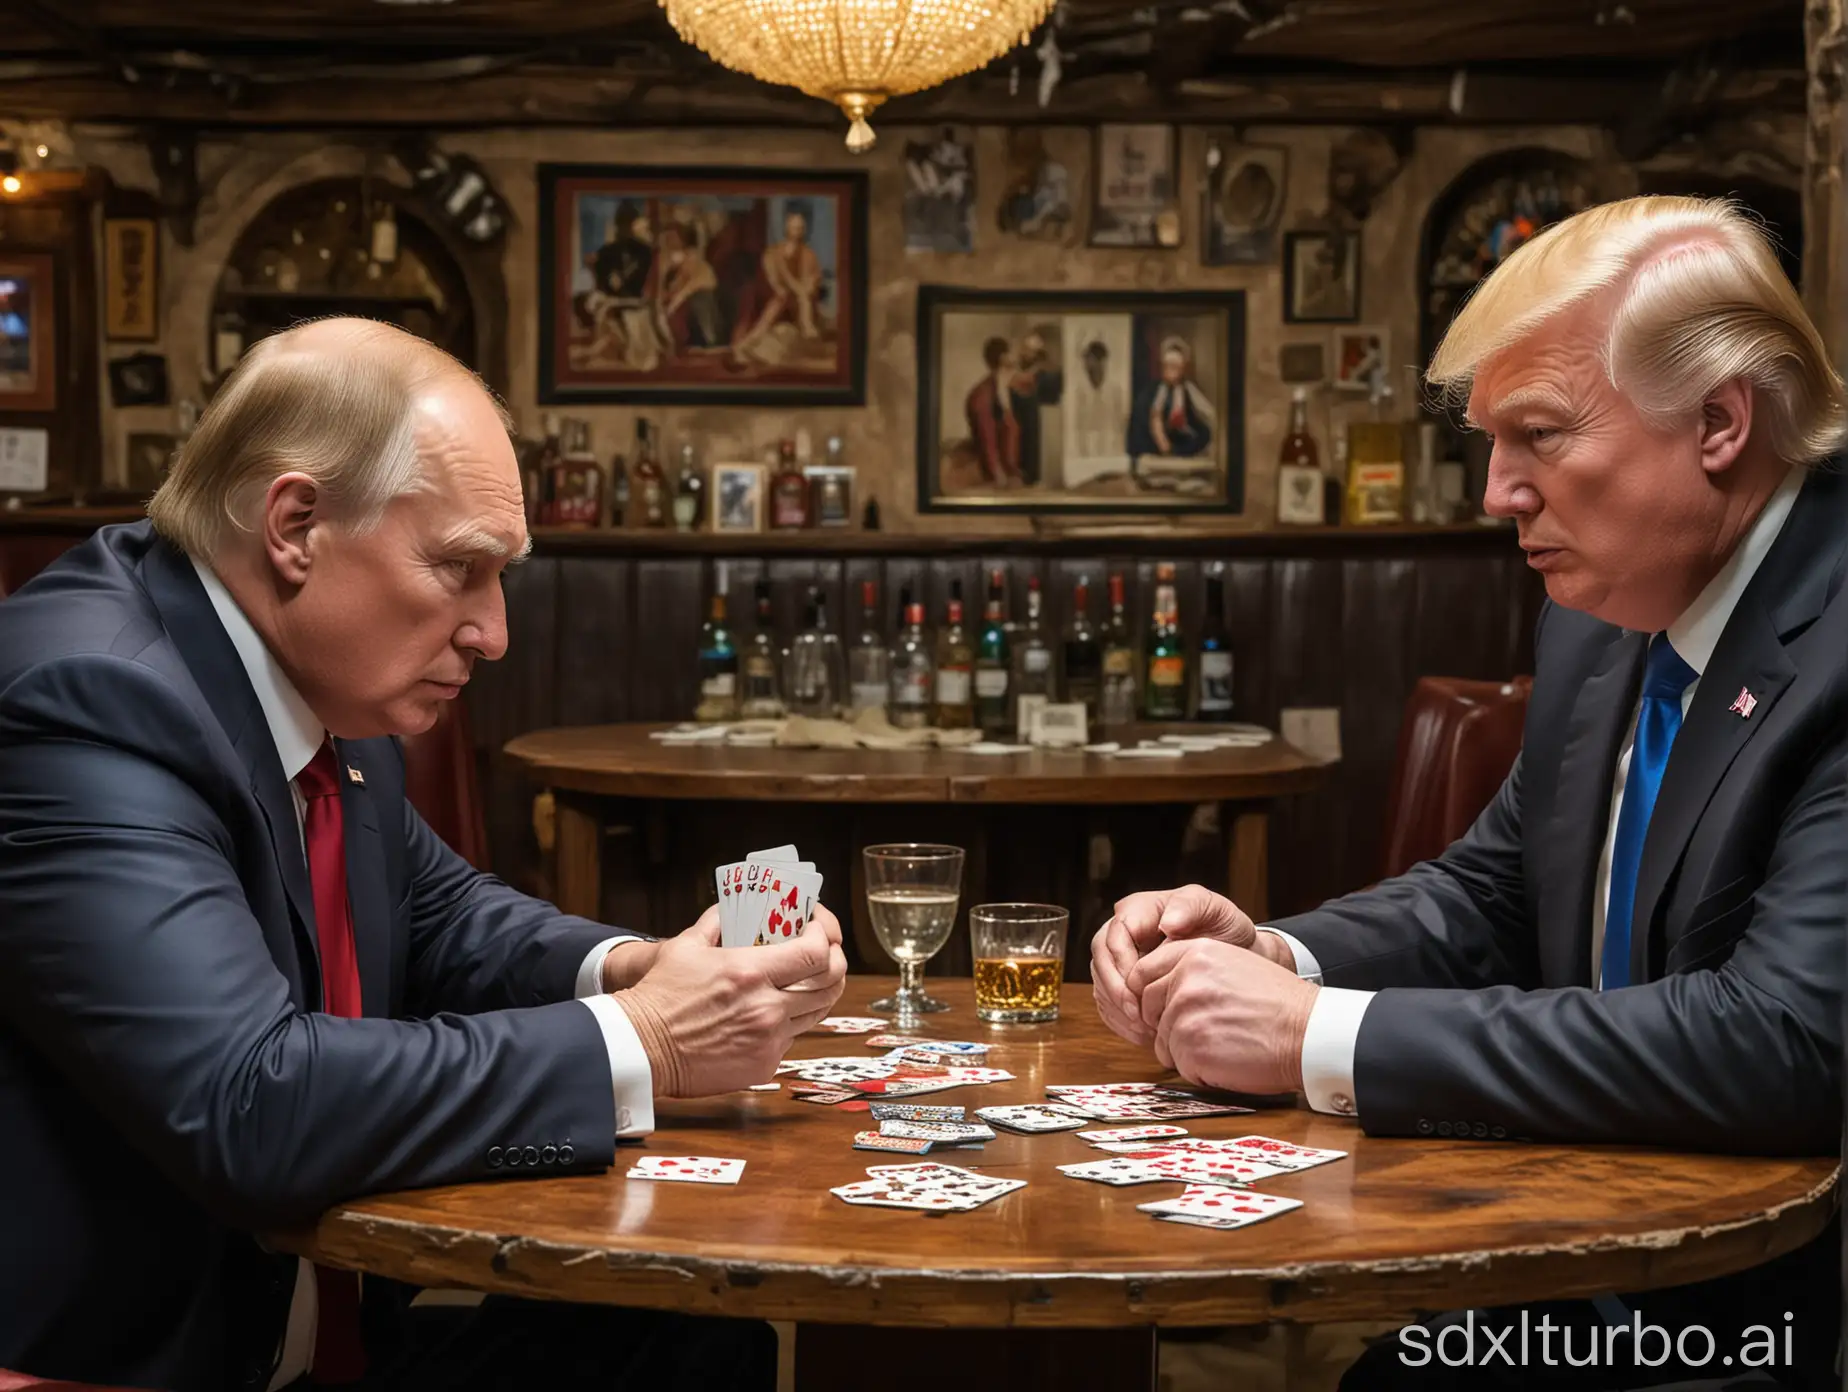 Donald-Trump-and-Vladimir-Putin-Playing-Cards-in-a-Mexican-Bar